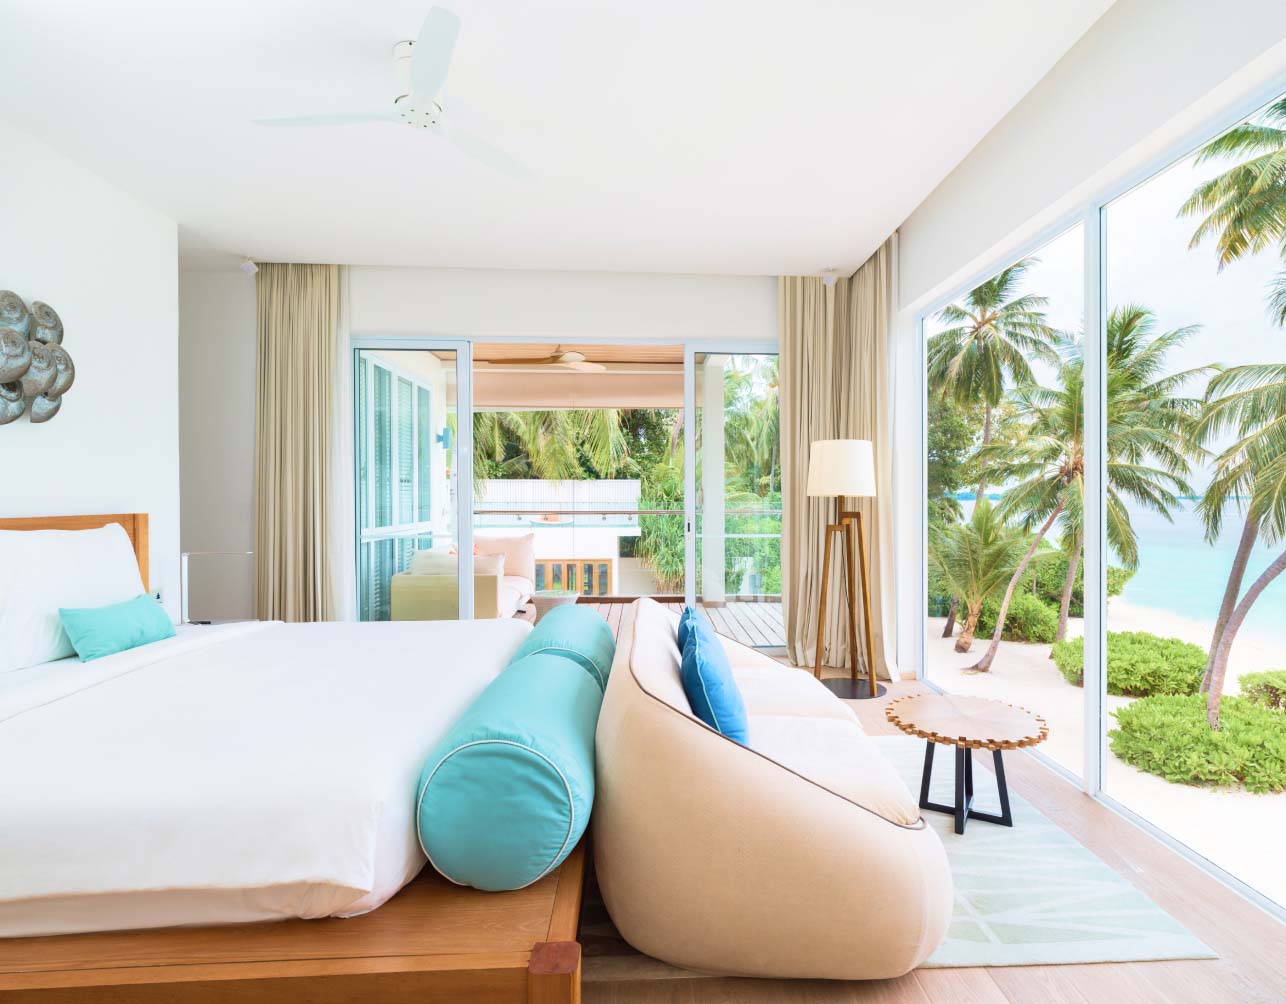 The oceanview master suite with private lounging balcony and ensuite bathroom in our Luxury Maldives Family Accommodations.